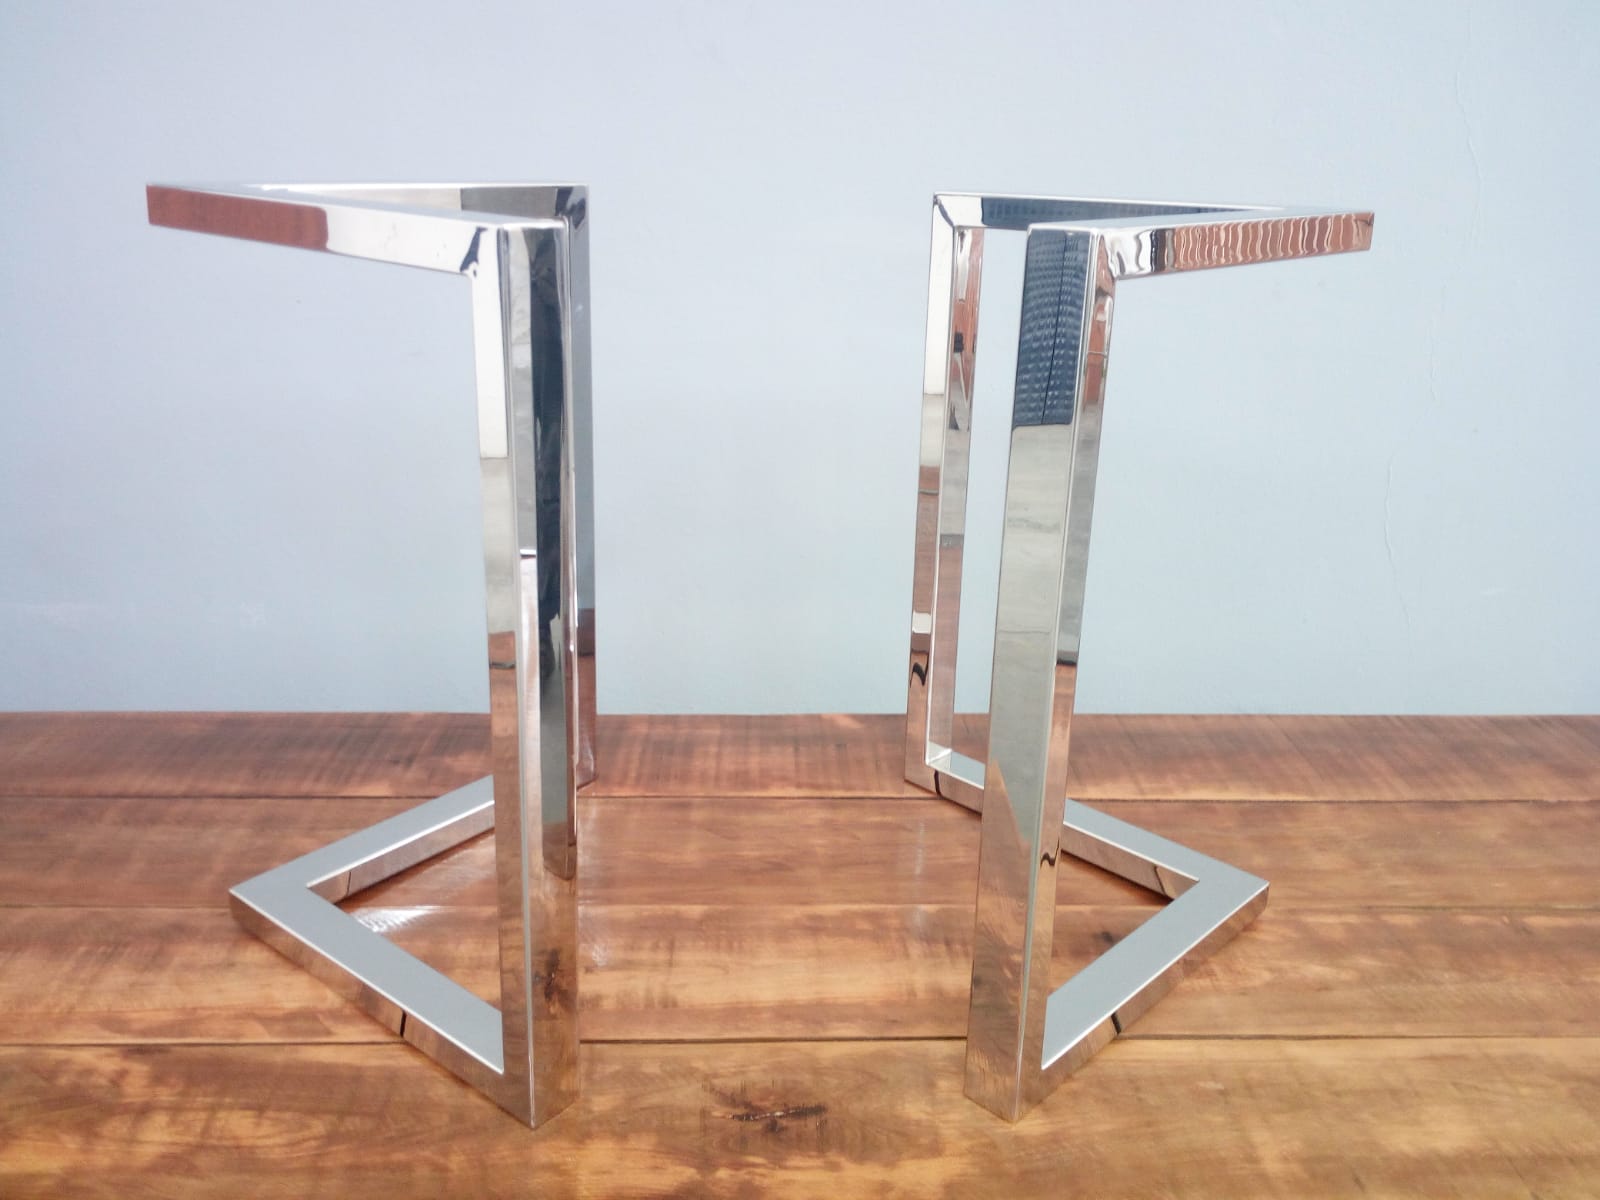 28" X 28" Bracket Table Legs, Stainless Steel, Height 26" To 30" Set(2)